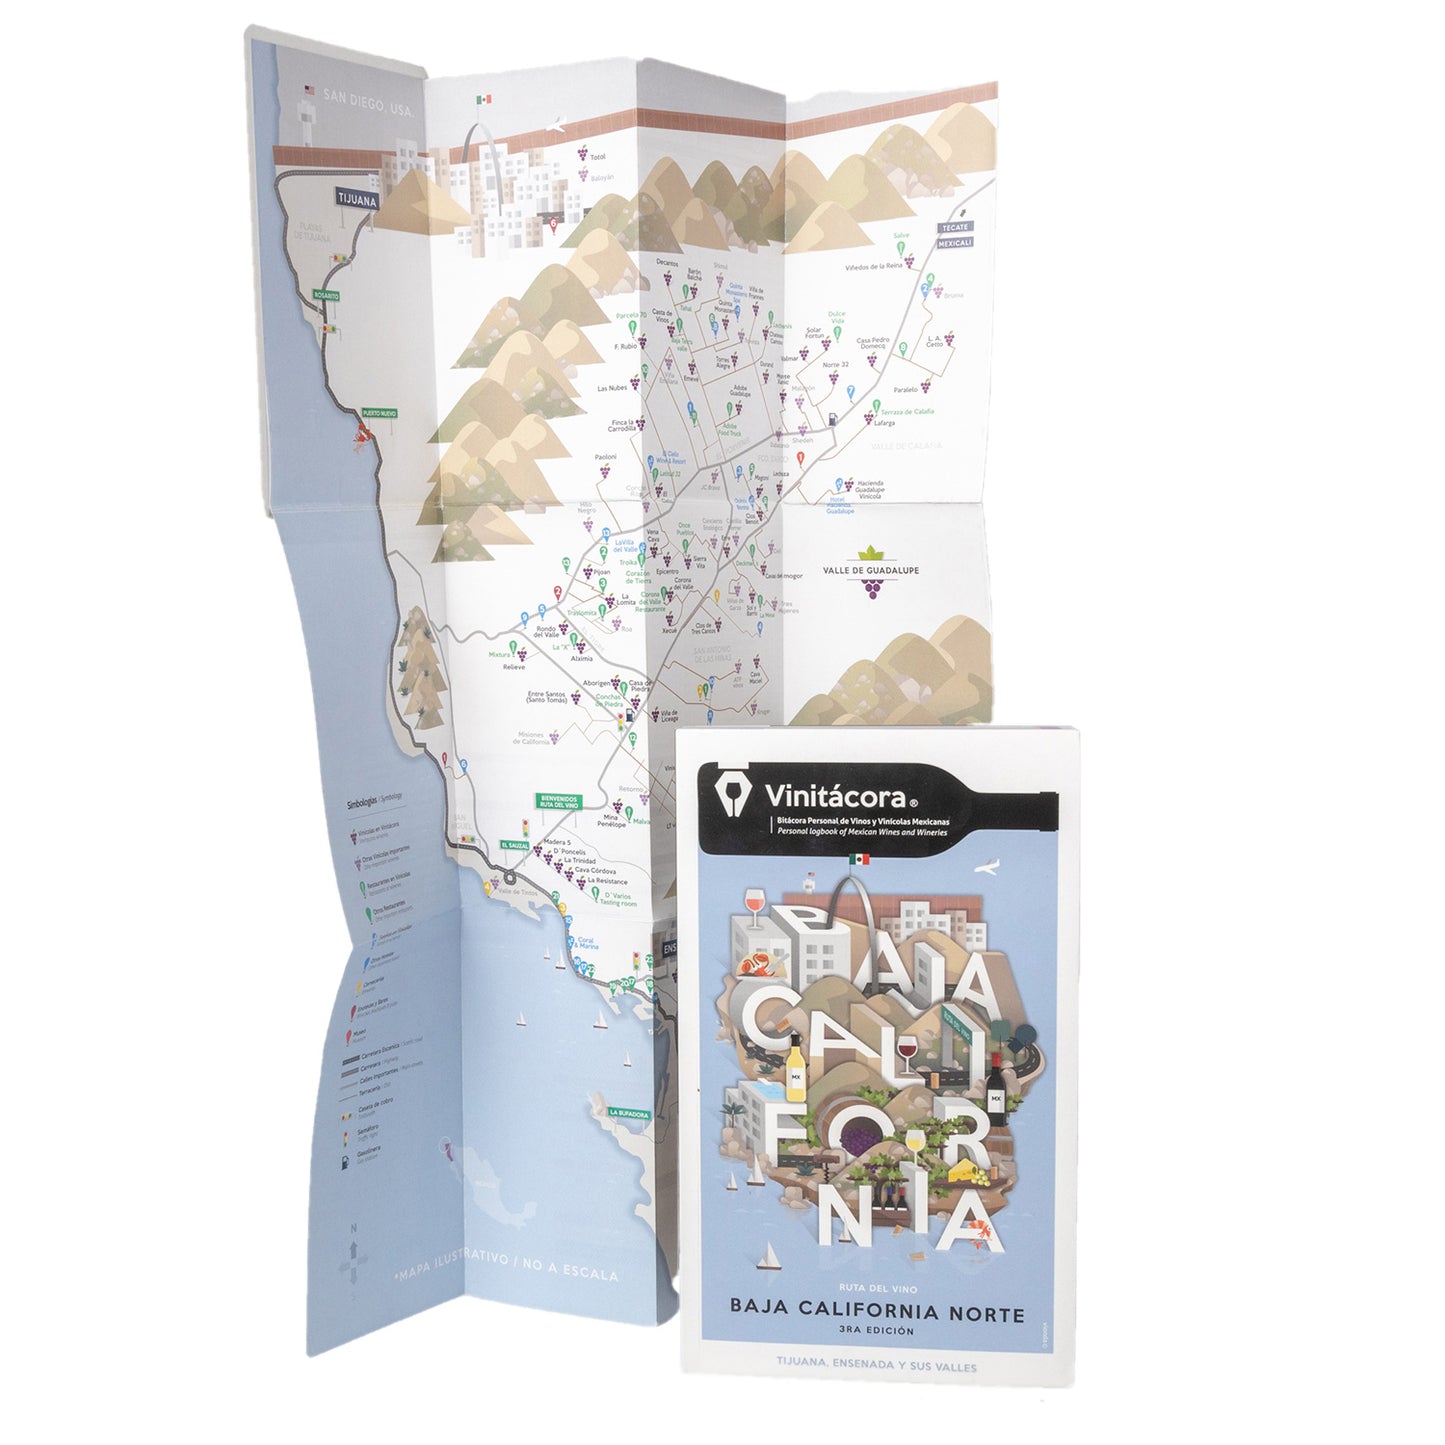 Vinitacora Baja California: Personal logbook of wines and wineries from Mexico - 3rd Edition Map Included